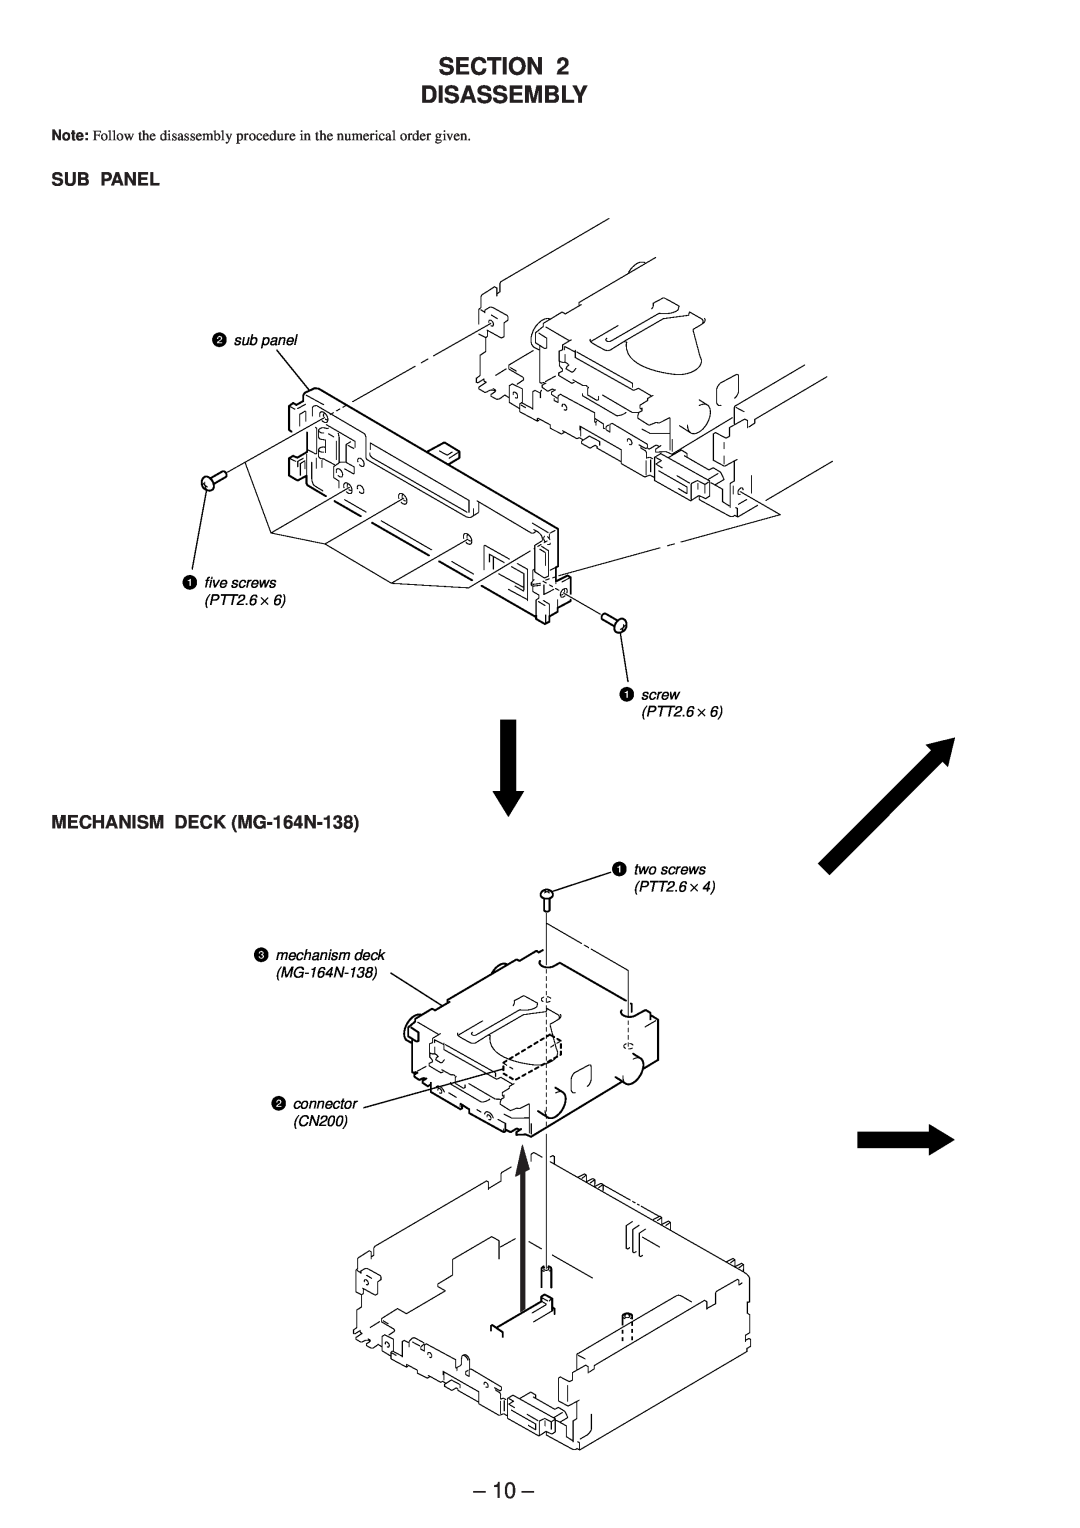 Sony MDX-C5970R service manual Section Disassembly, 10, Sub Panel, MECHANISM DECK MG-164N-138 